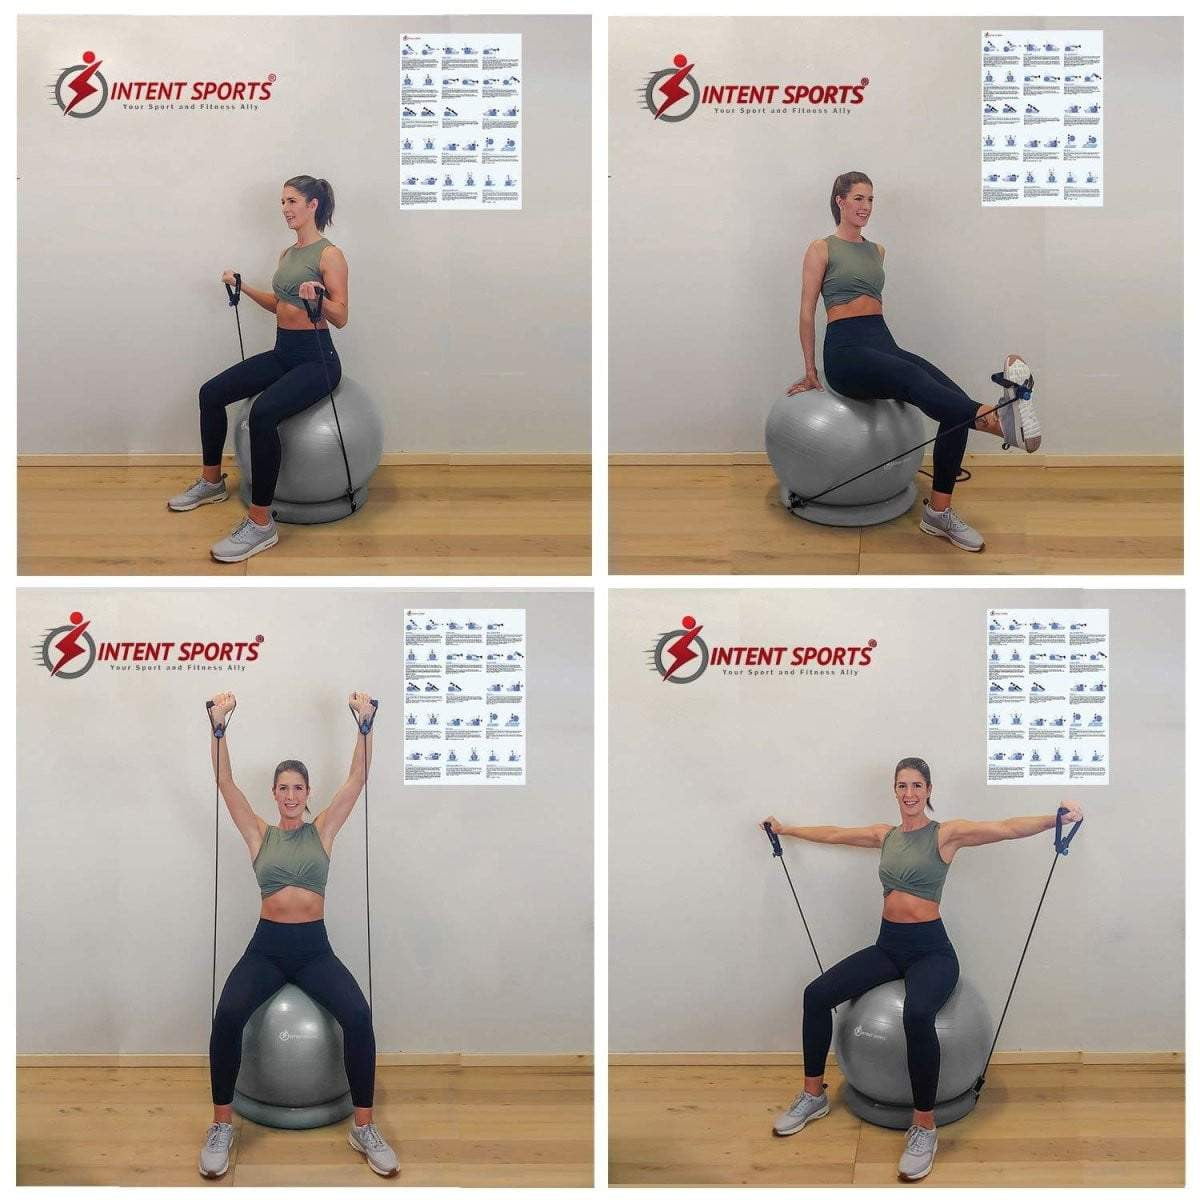 Yoga Exercise Ball Gym - Intent Sports